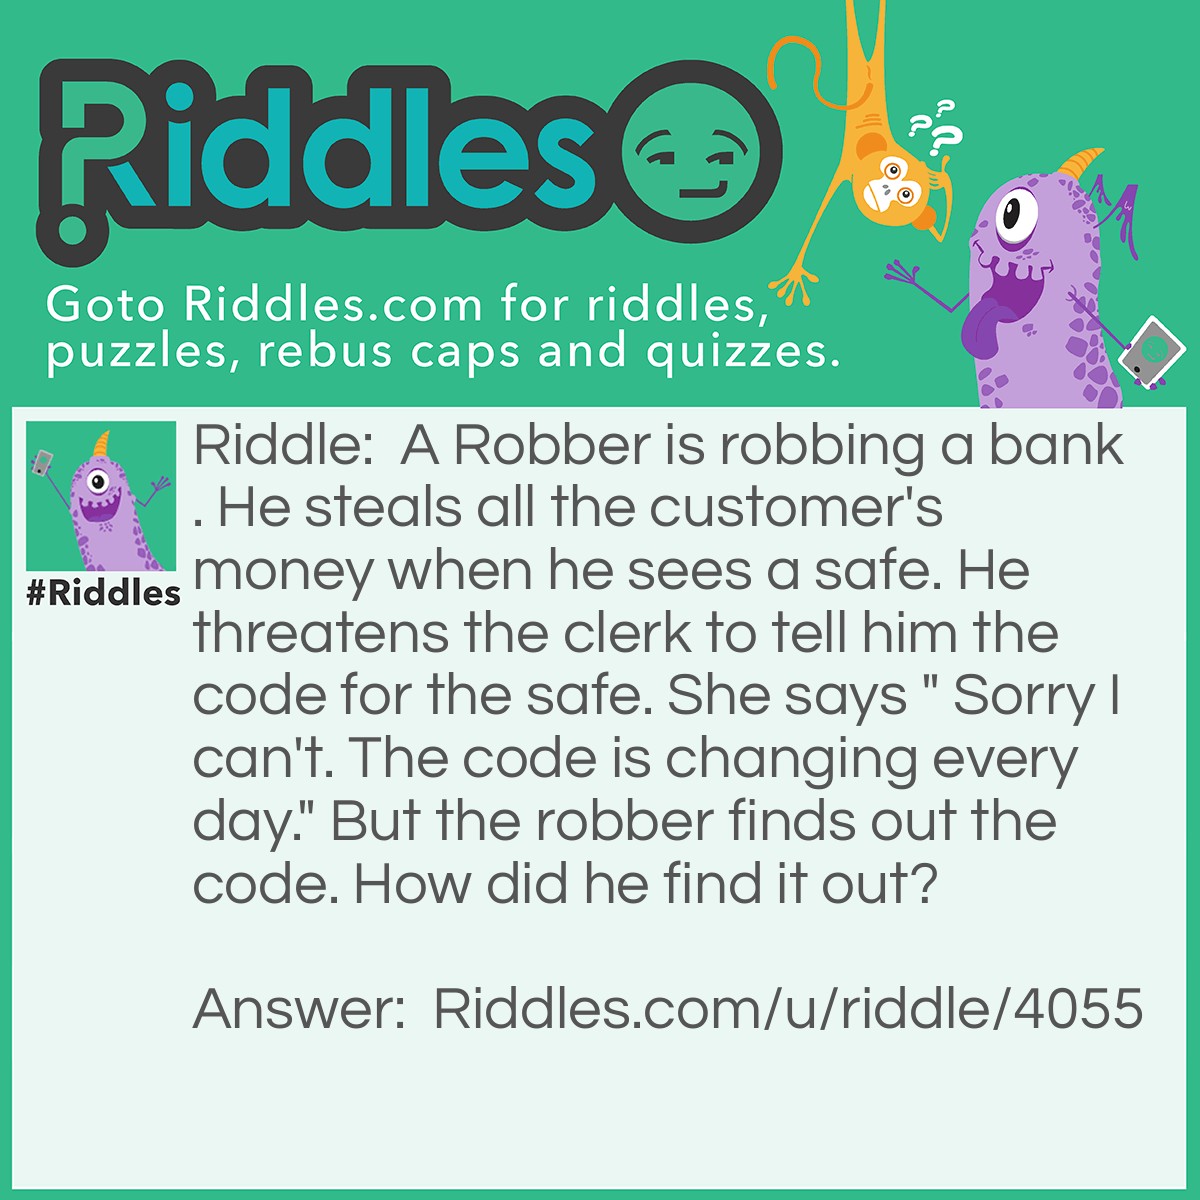 Riddle: A Robber is robbing a bank. He steals all the customer's money when he sees a safe. He threatens the clerk to tell him the code for the safe. She says " Sorry I can't. The code is changing every day." But the robber finds out the code. How did he find it out? Answer: "The code is CHANGING everyday."